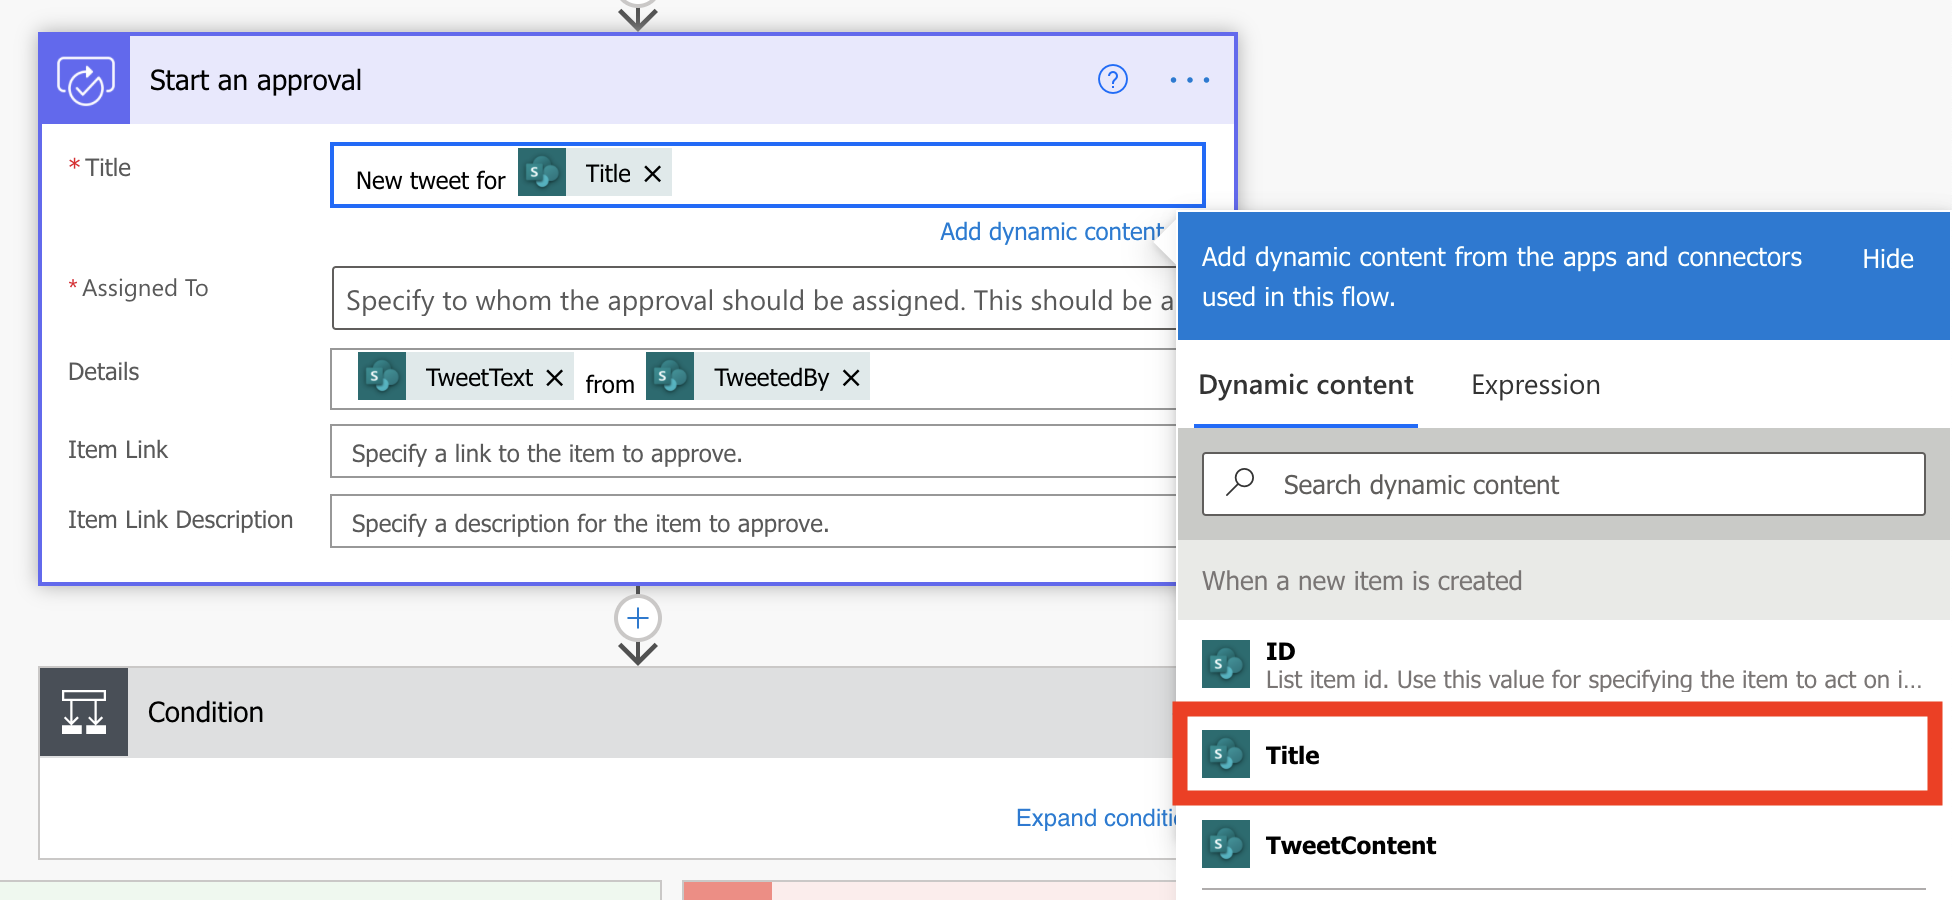 Screenshot of the Start an approval action with the text "New tweet for" and the Dynamic content dialog open and Title selected.